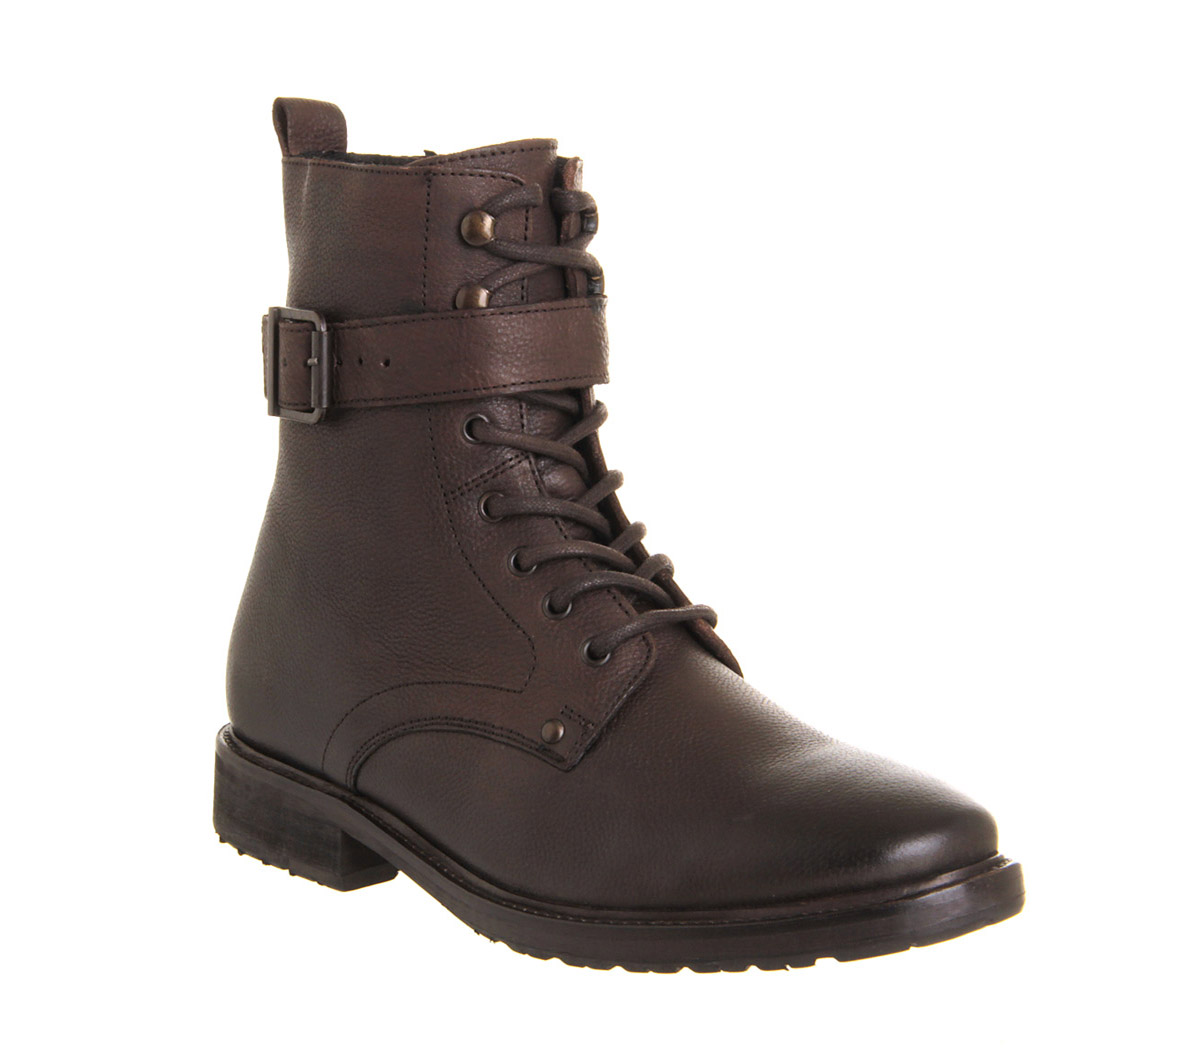 OFFICEAvatar Top Strap bootsBrown Leather